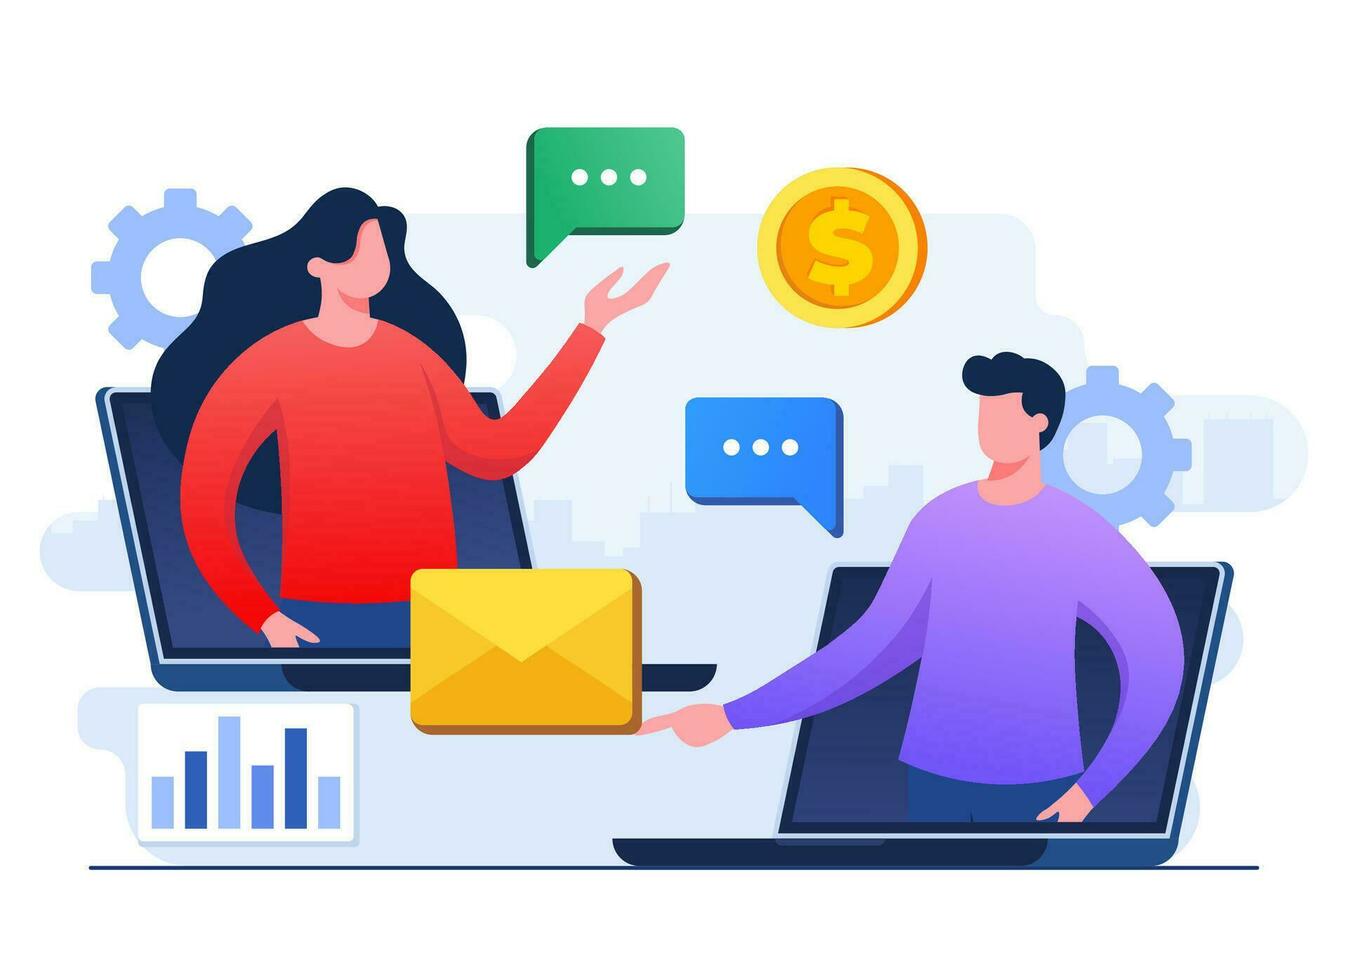 Business people connecting online, Employees speaking on video calls on laptop, Video Conference, Team thinking and brainstorming, Remote working, Virtual meeting, Teleconference, vector